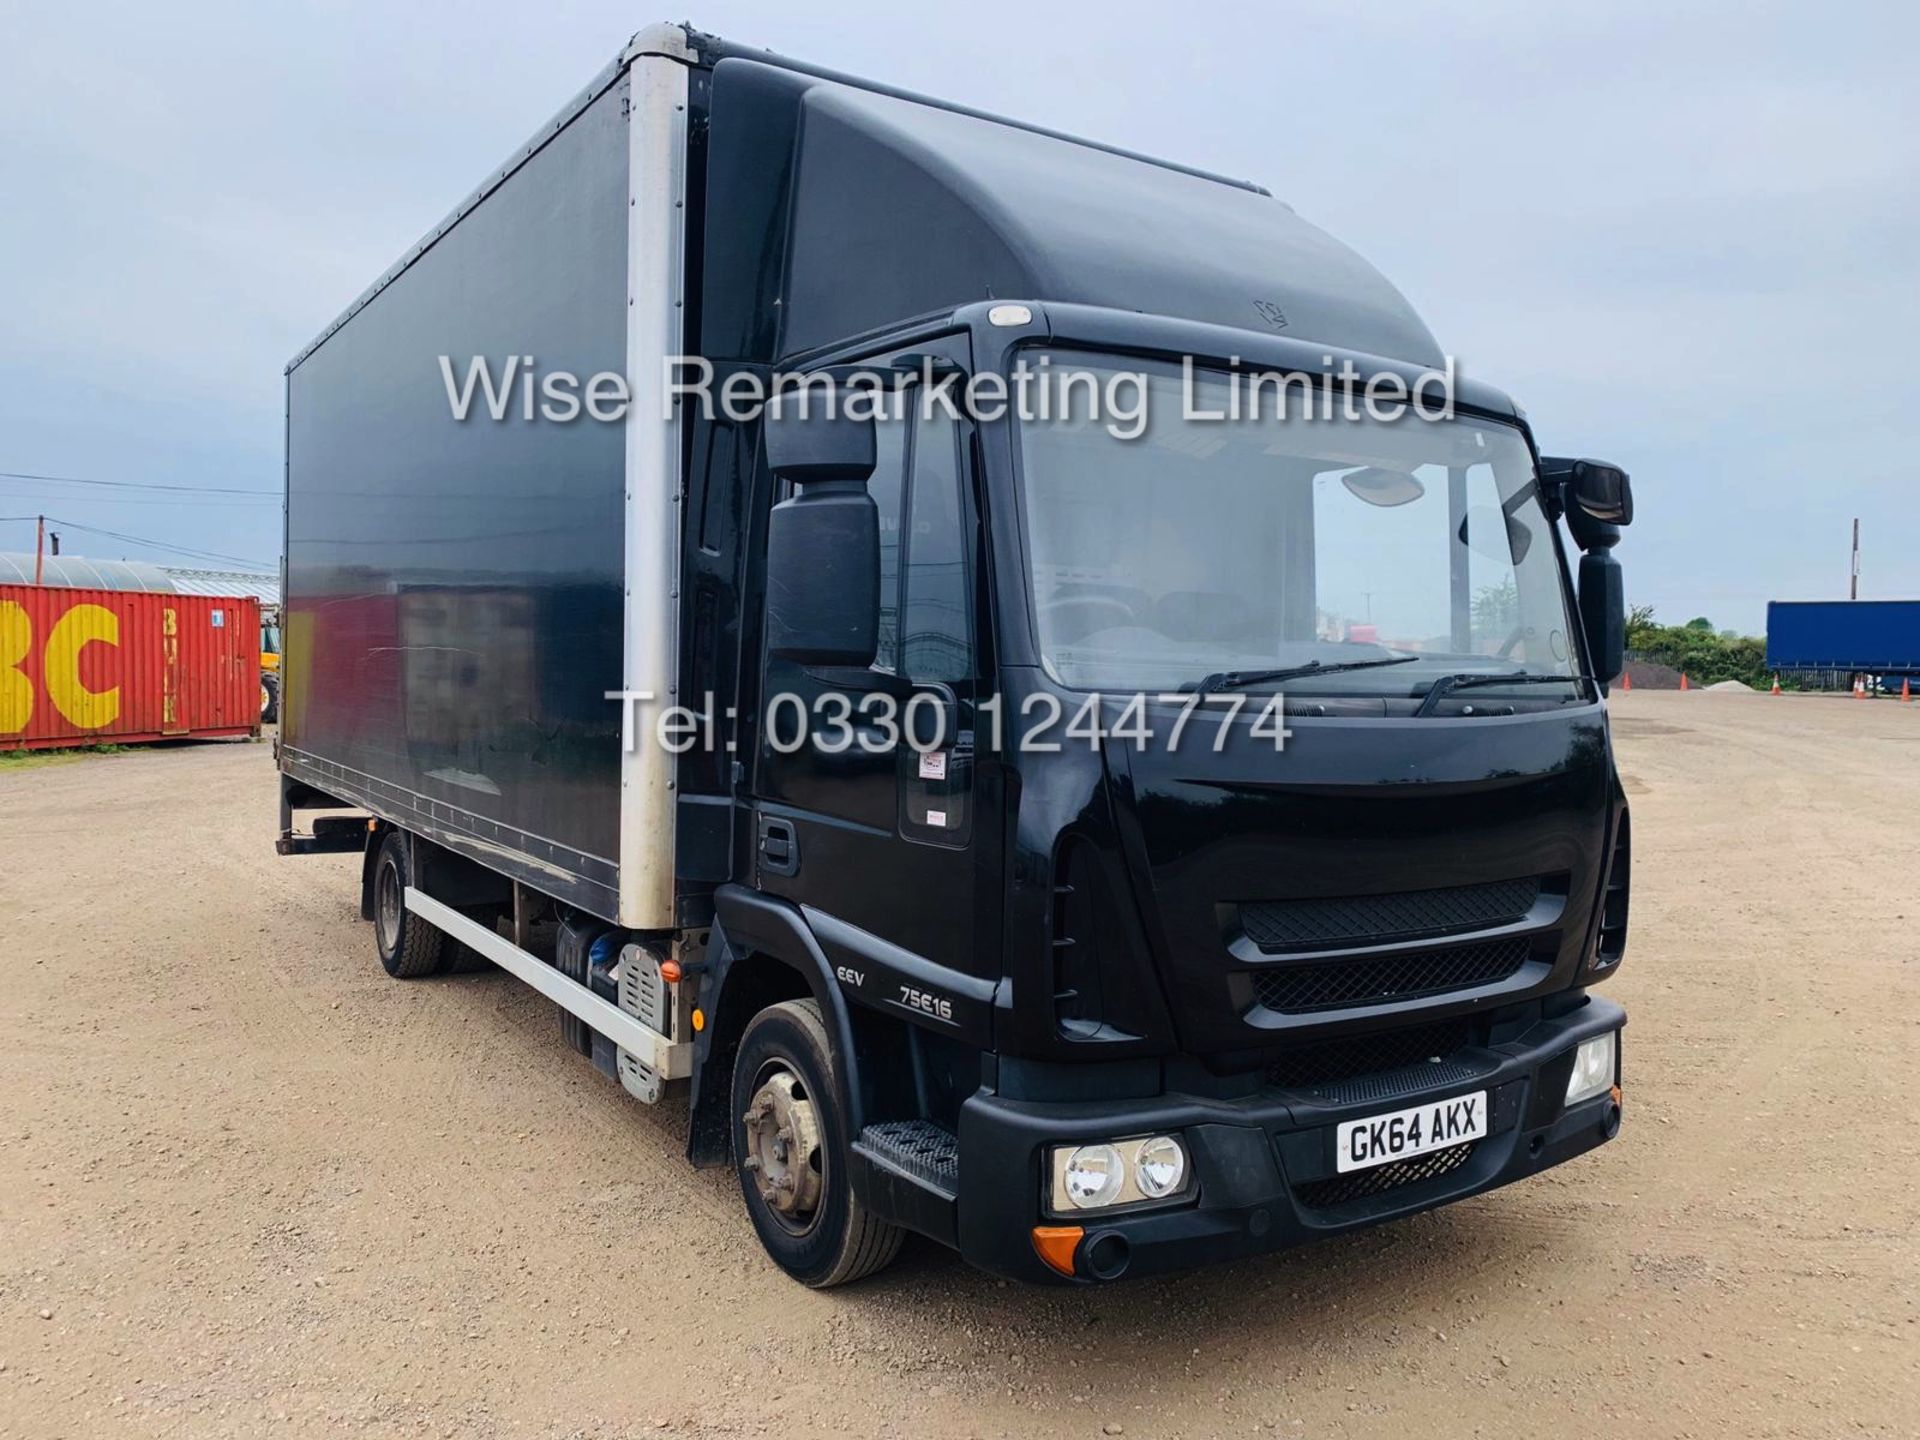 IVECO EURO CARGO 75E16 EURO 6 "ULEZ COMPLIANT - 20 FOOT BOX VAN WITH TAIL LIFT (2014 64 REG) - Image 2 of 23